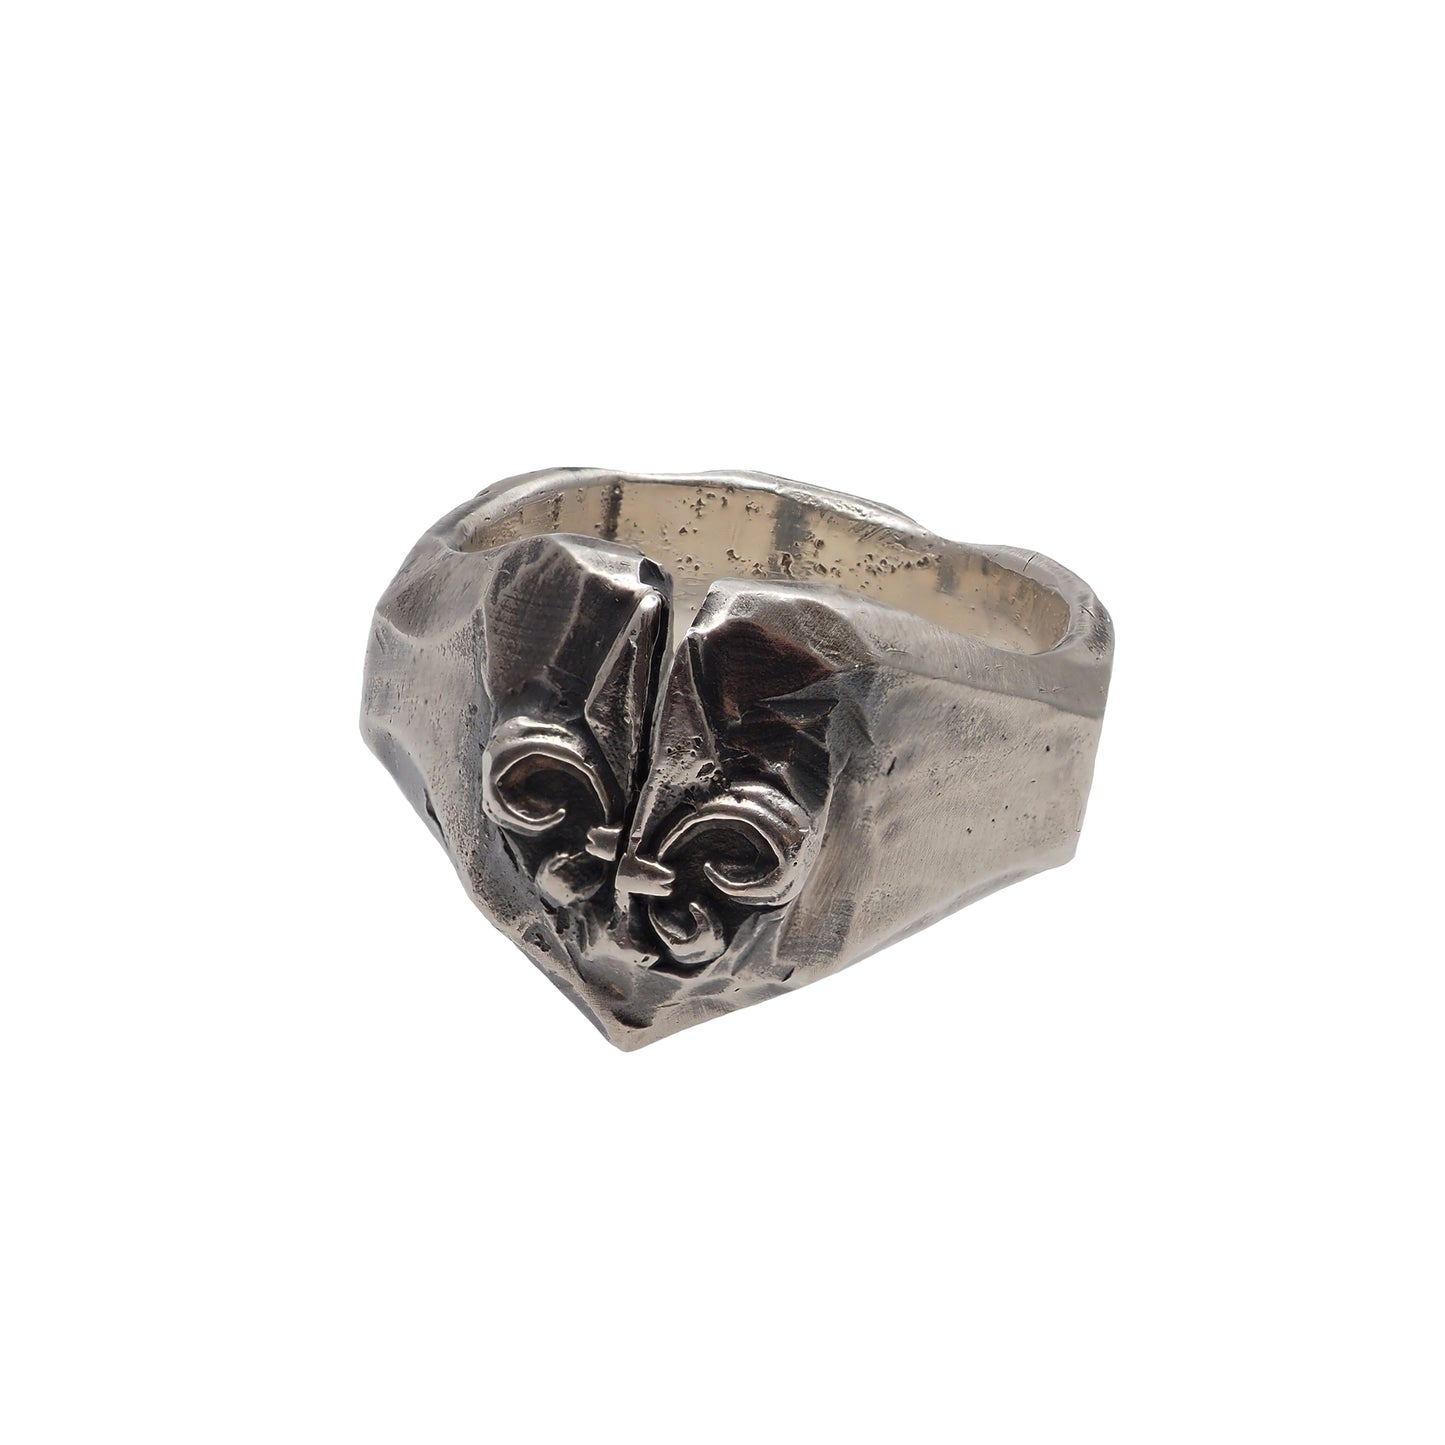 King Arthur's Knight Silver Signet Ring features a fleur-de-lis on a Shattered shield- A Tribute to Arthurian Legends